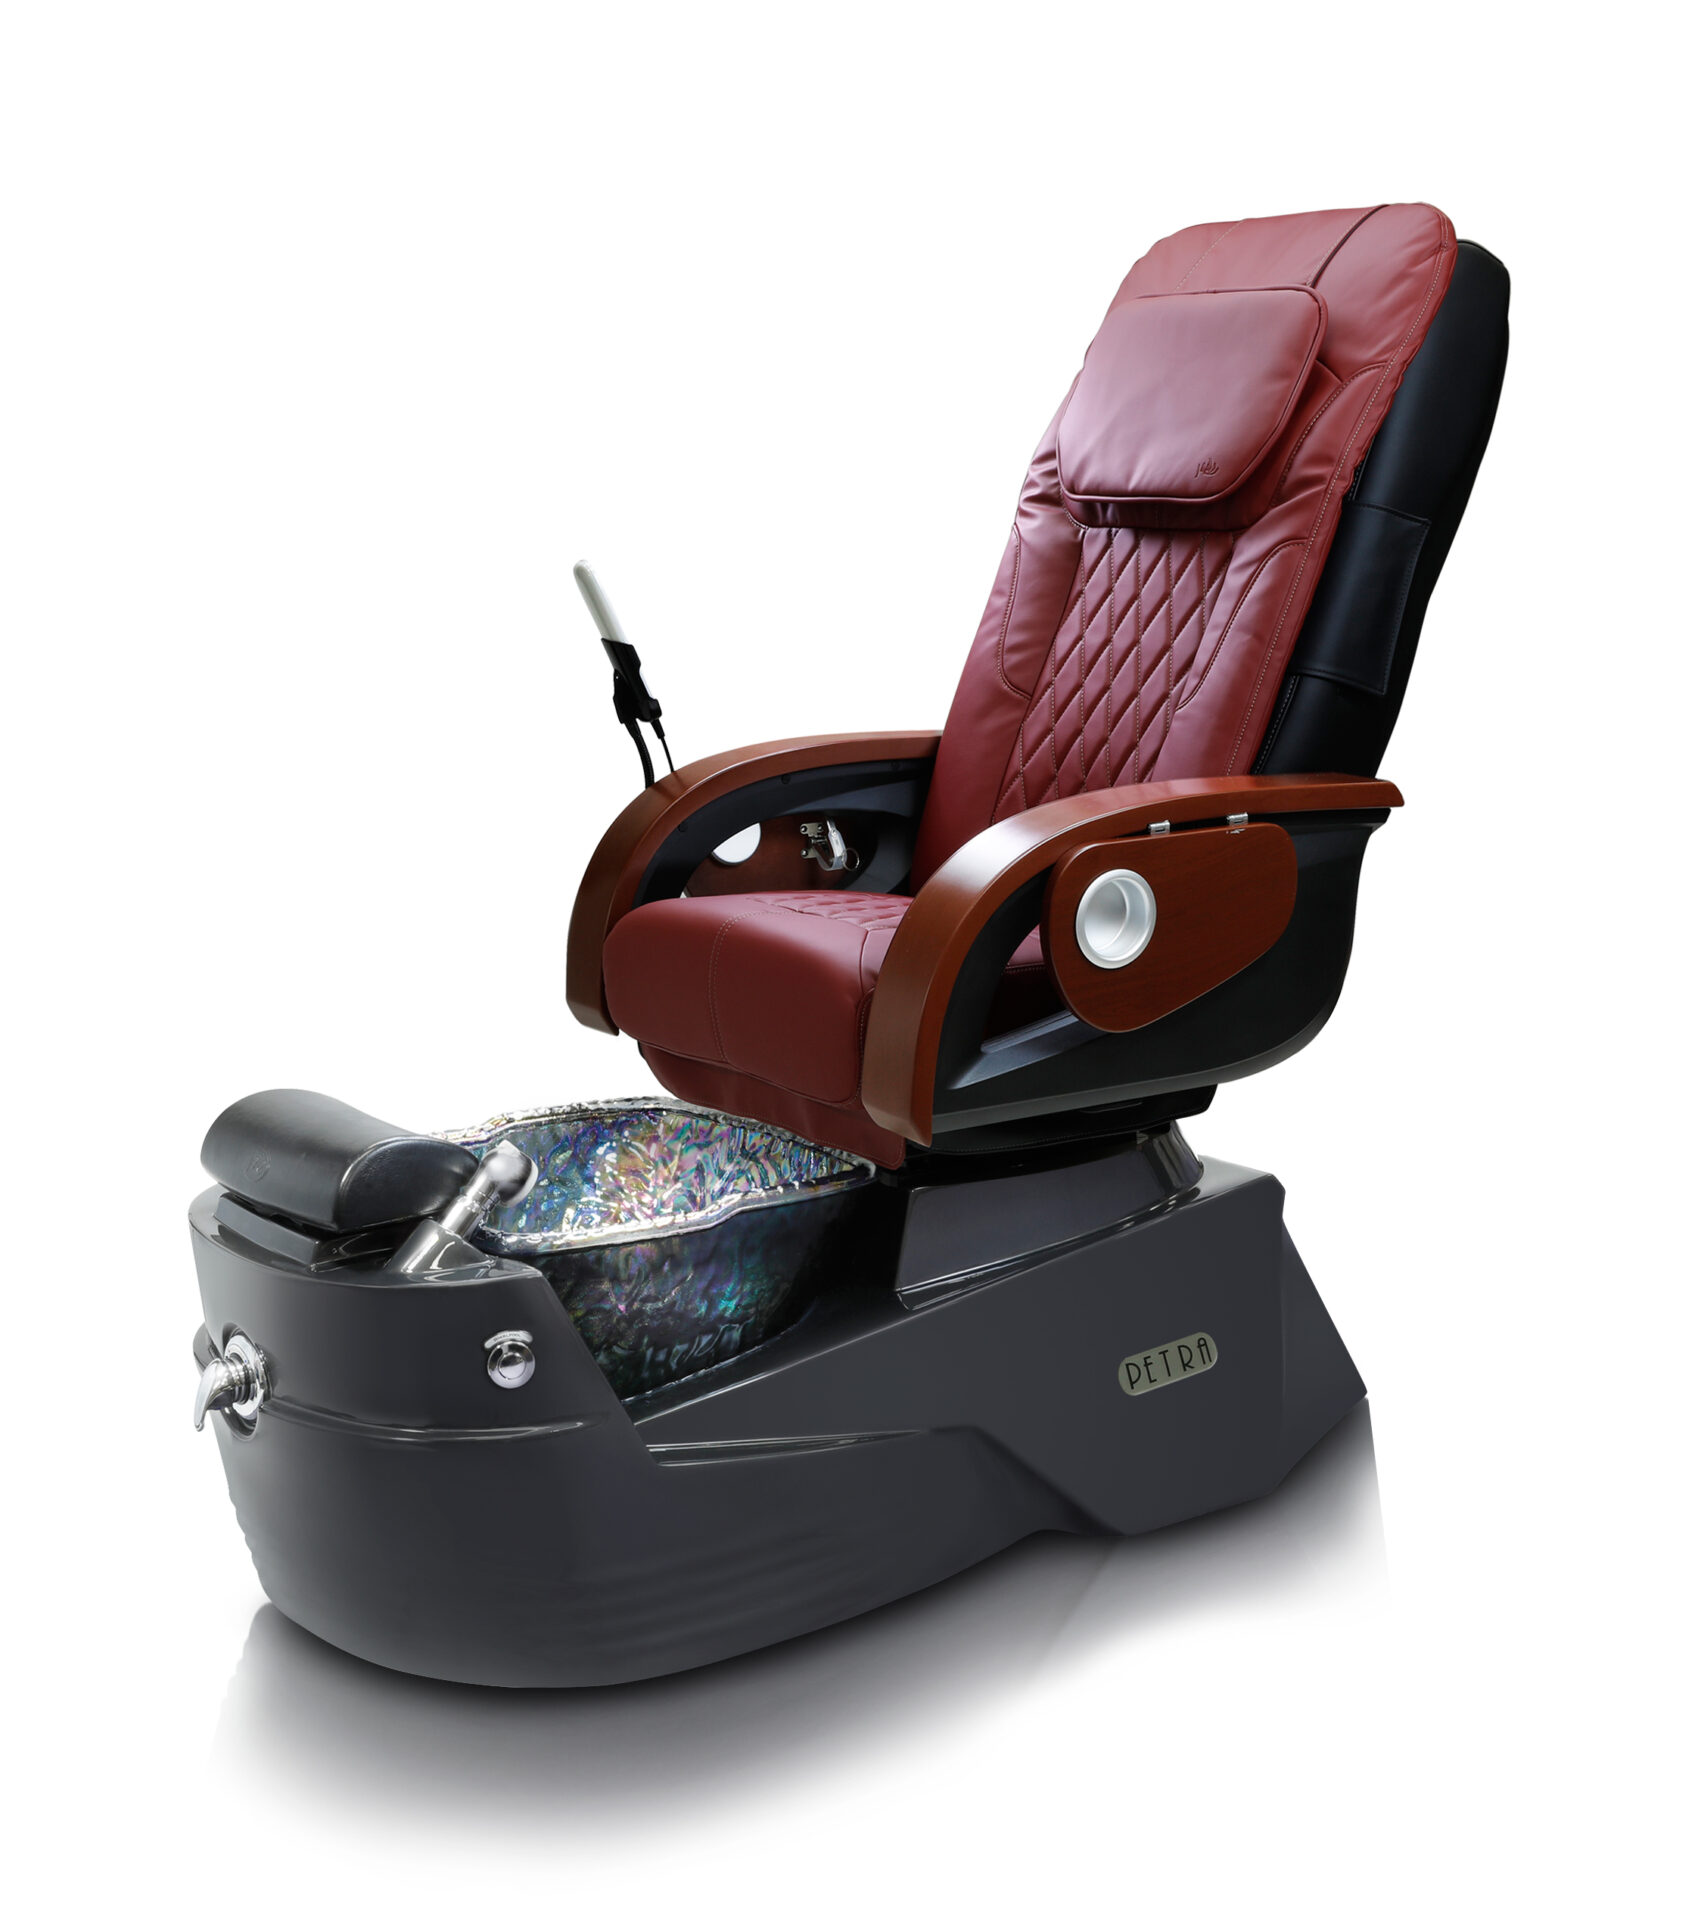 Petra-GX-Pedicure-Spa-Grey-Base-Black-Bowl-Red-Chair J& A Pedicure Spa Chair & Furniture Collection